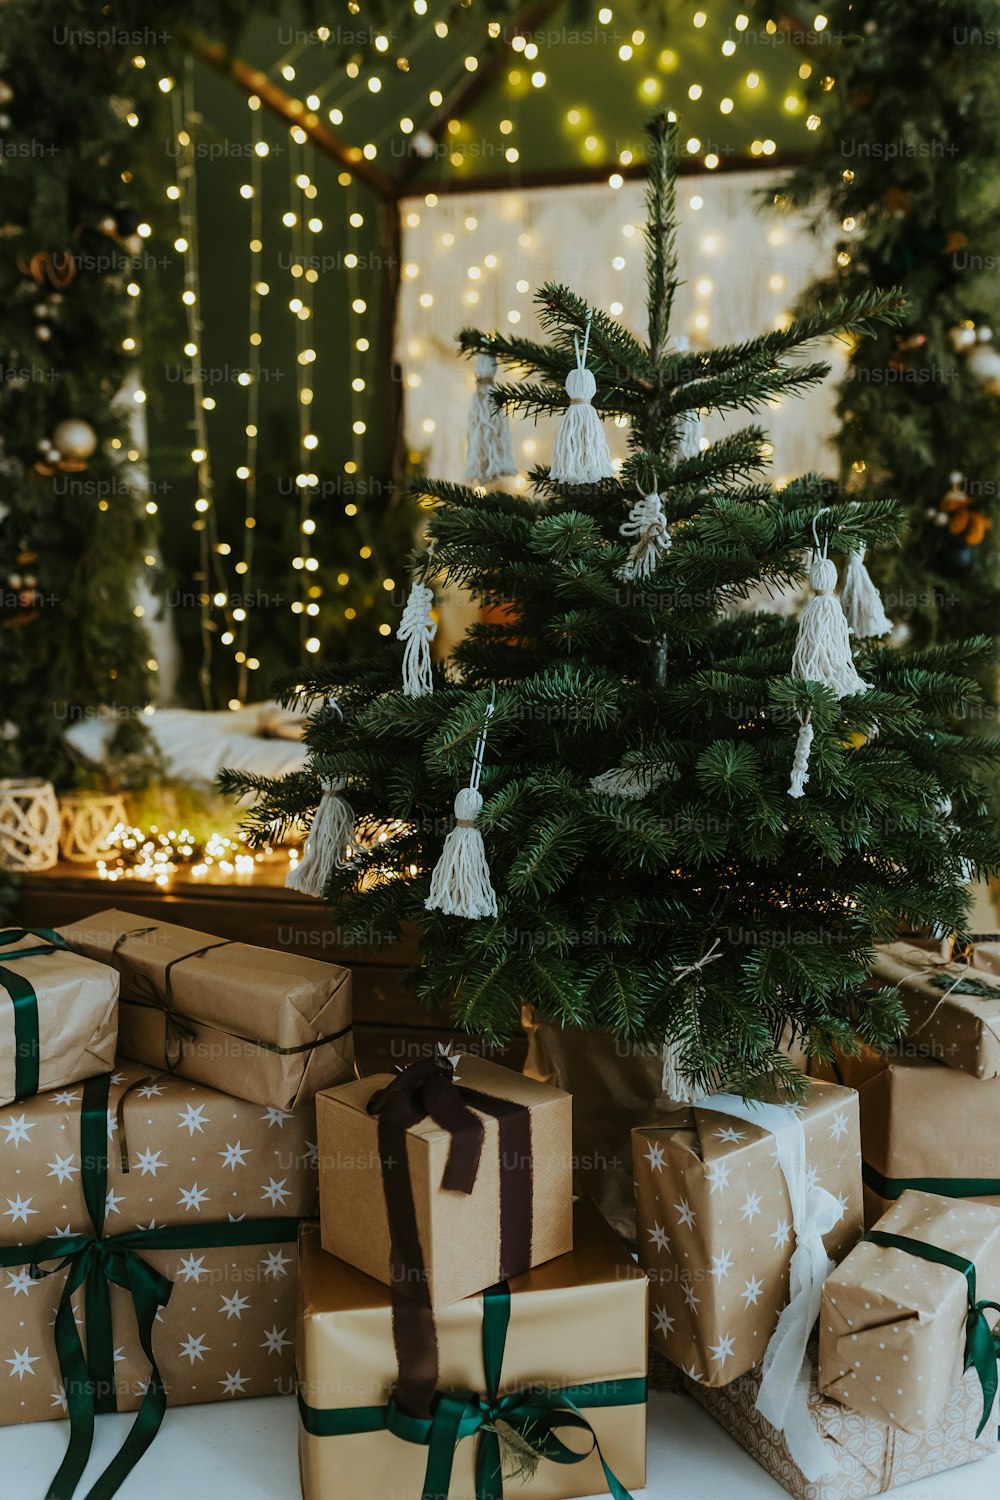 presents under a christmas tree with lights in the background